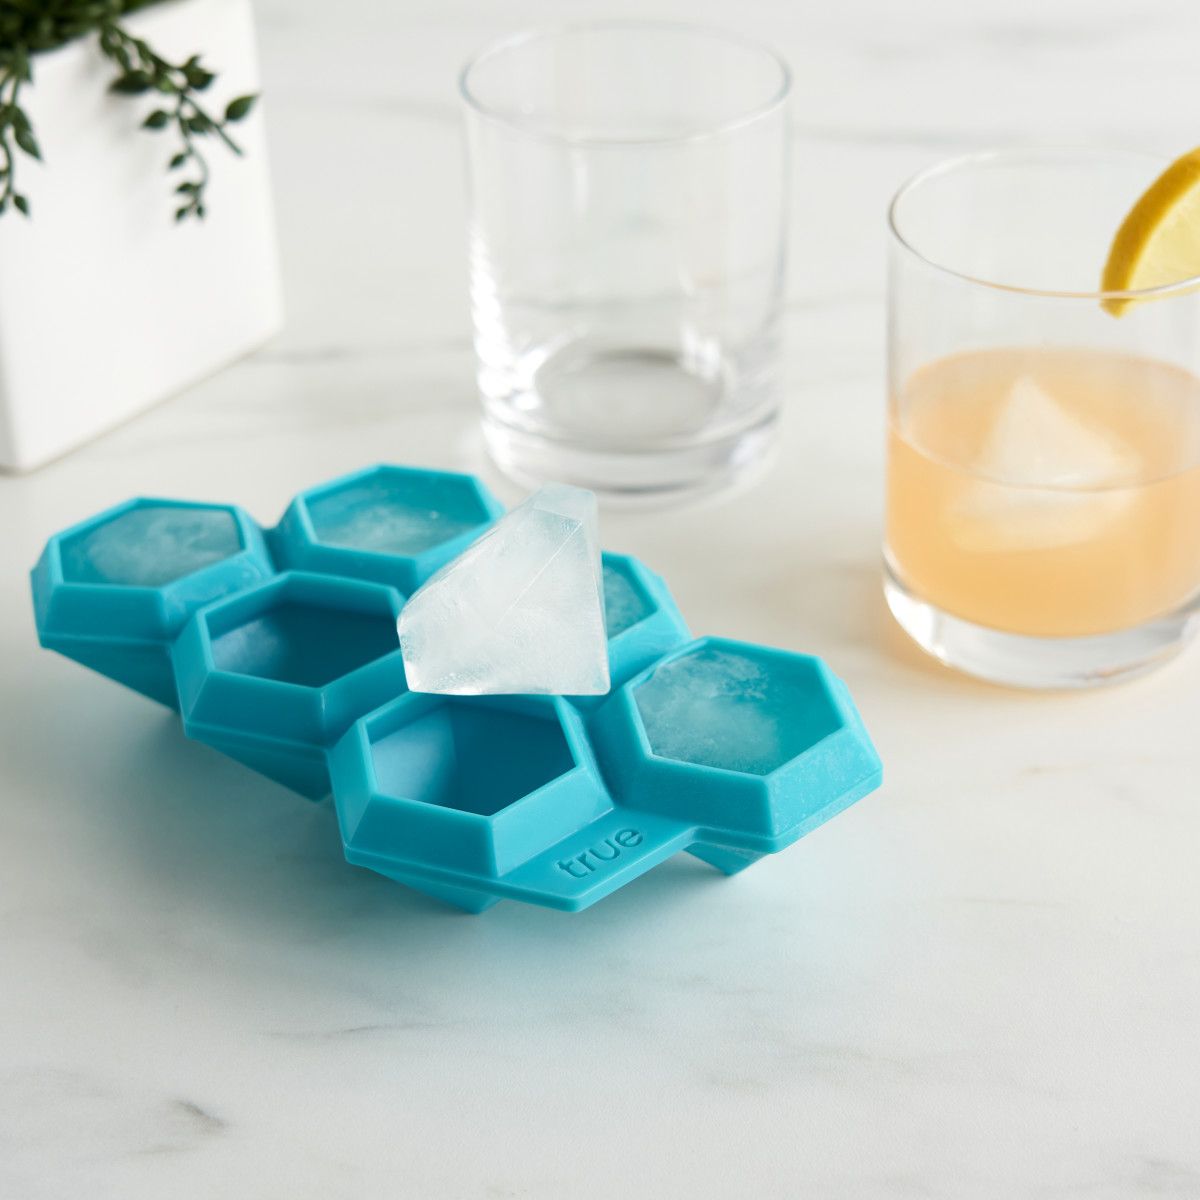 True Zoo Diamond Silicone Mold and Ice Cube Tray for Whiskey, Bath